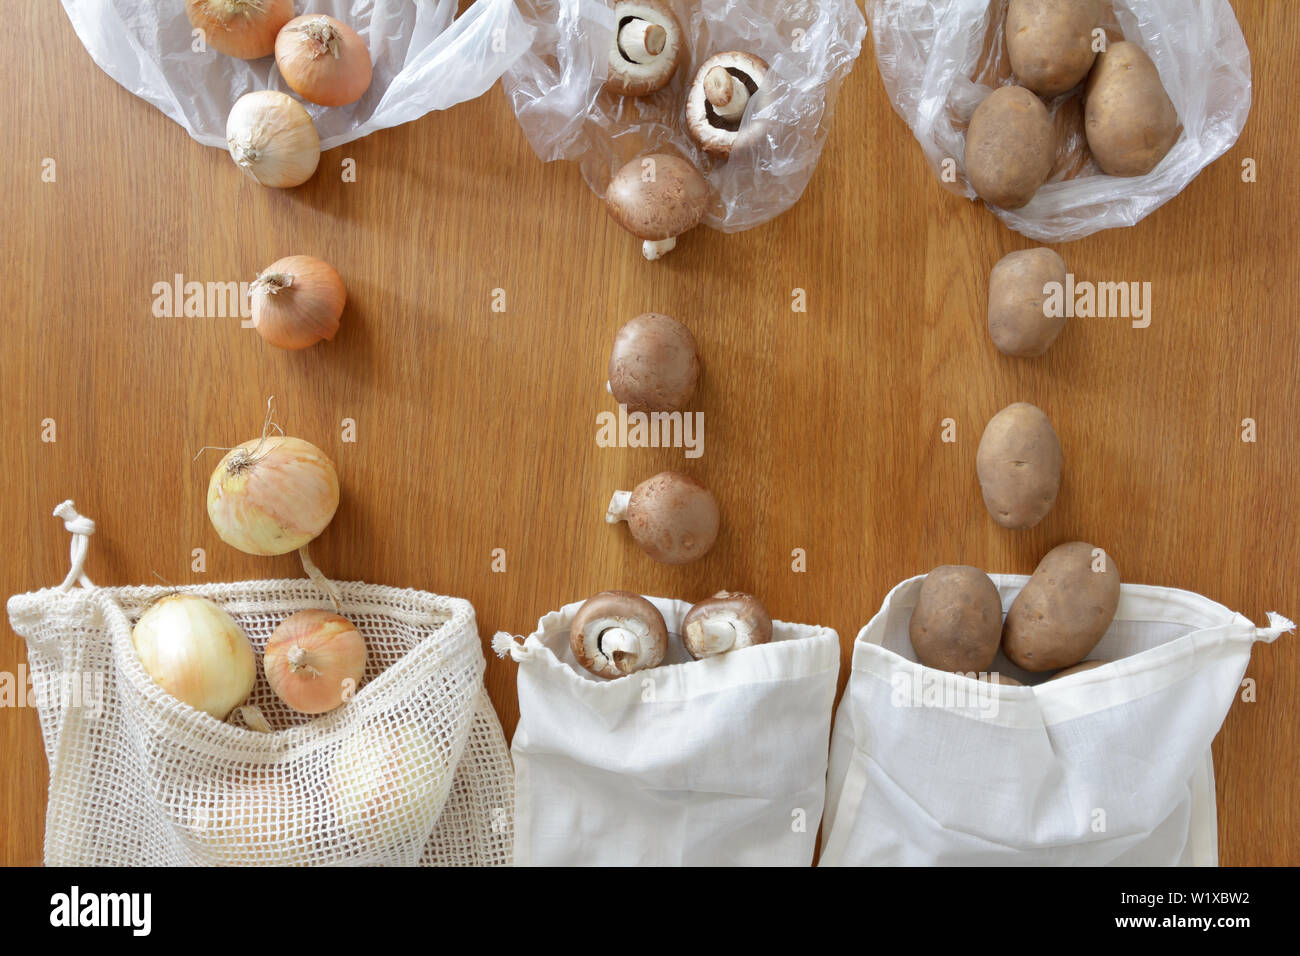 Thin plastic vs reusable cotton grocery bags with fresh produce on wooden background, zero waste concept. Stock Photo